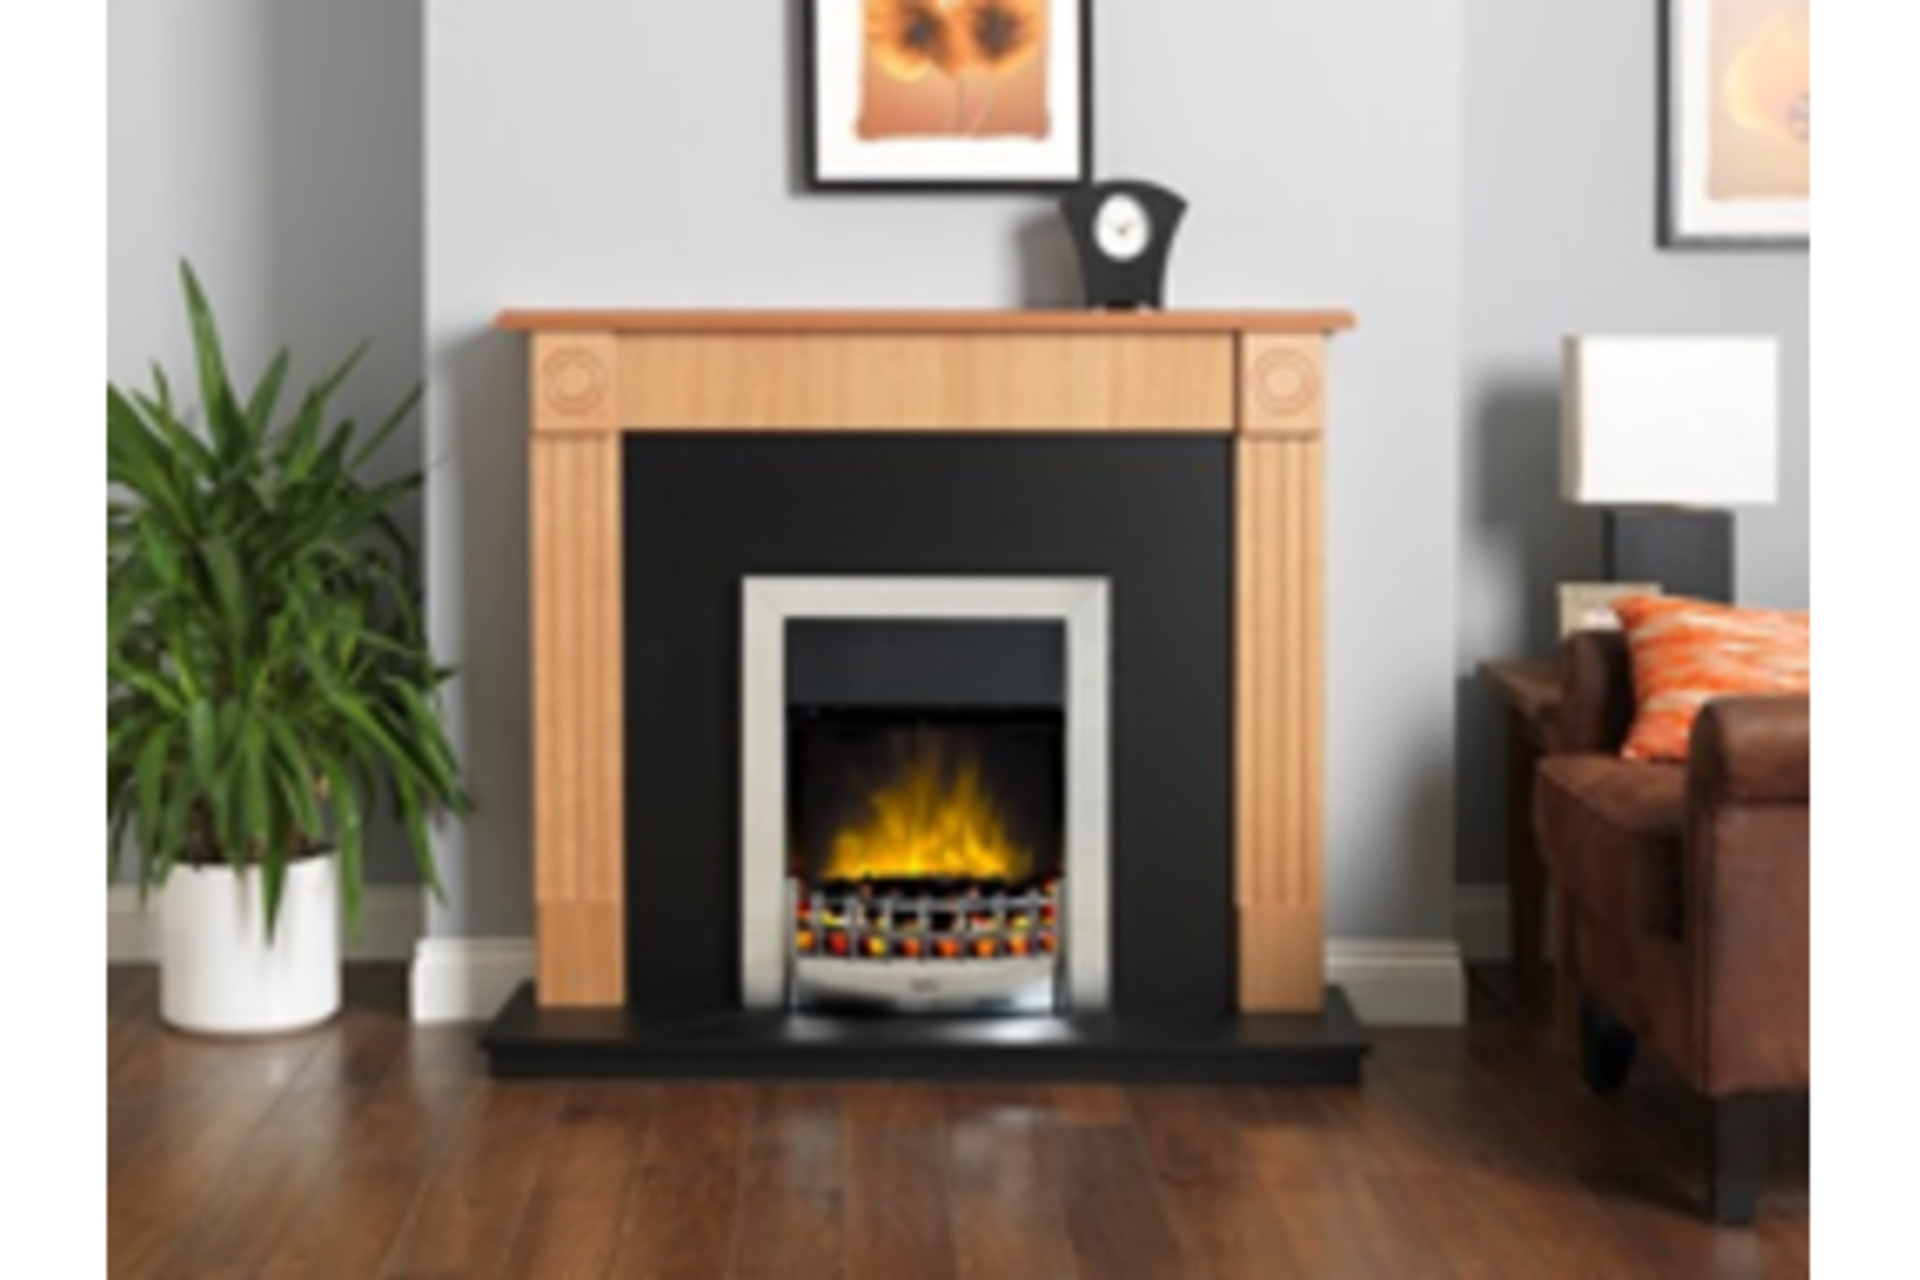 TRADE LOT 2 x New - Robinson Willey Wycombe Electric Fire Suite. RRP £599.99 each. Natural oak